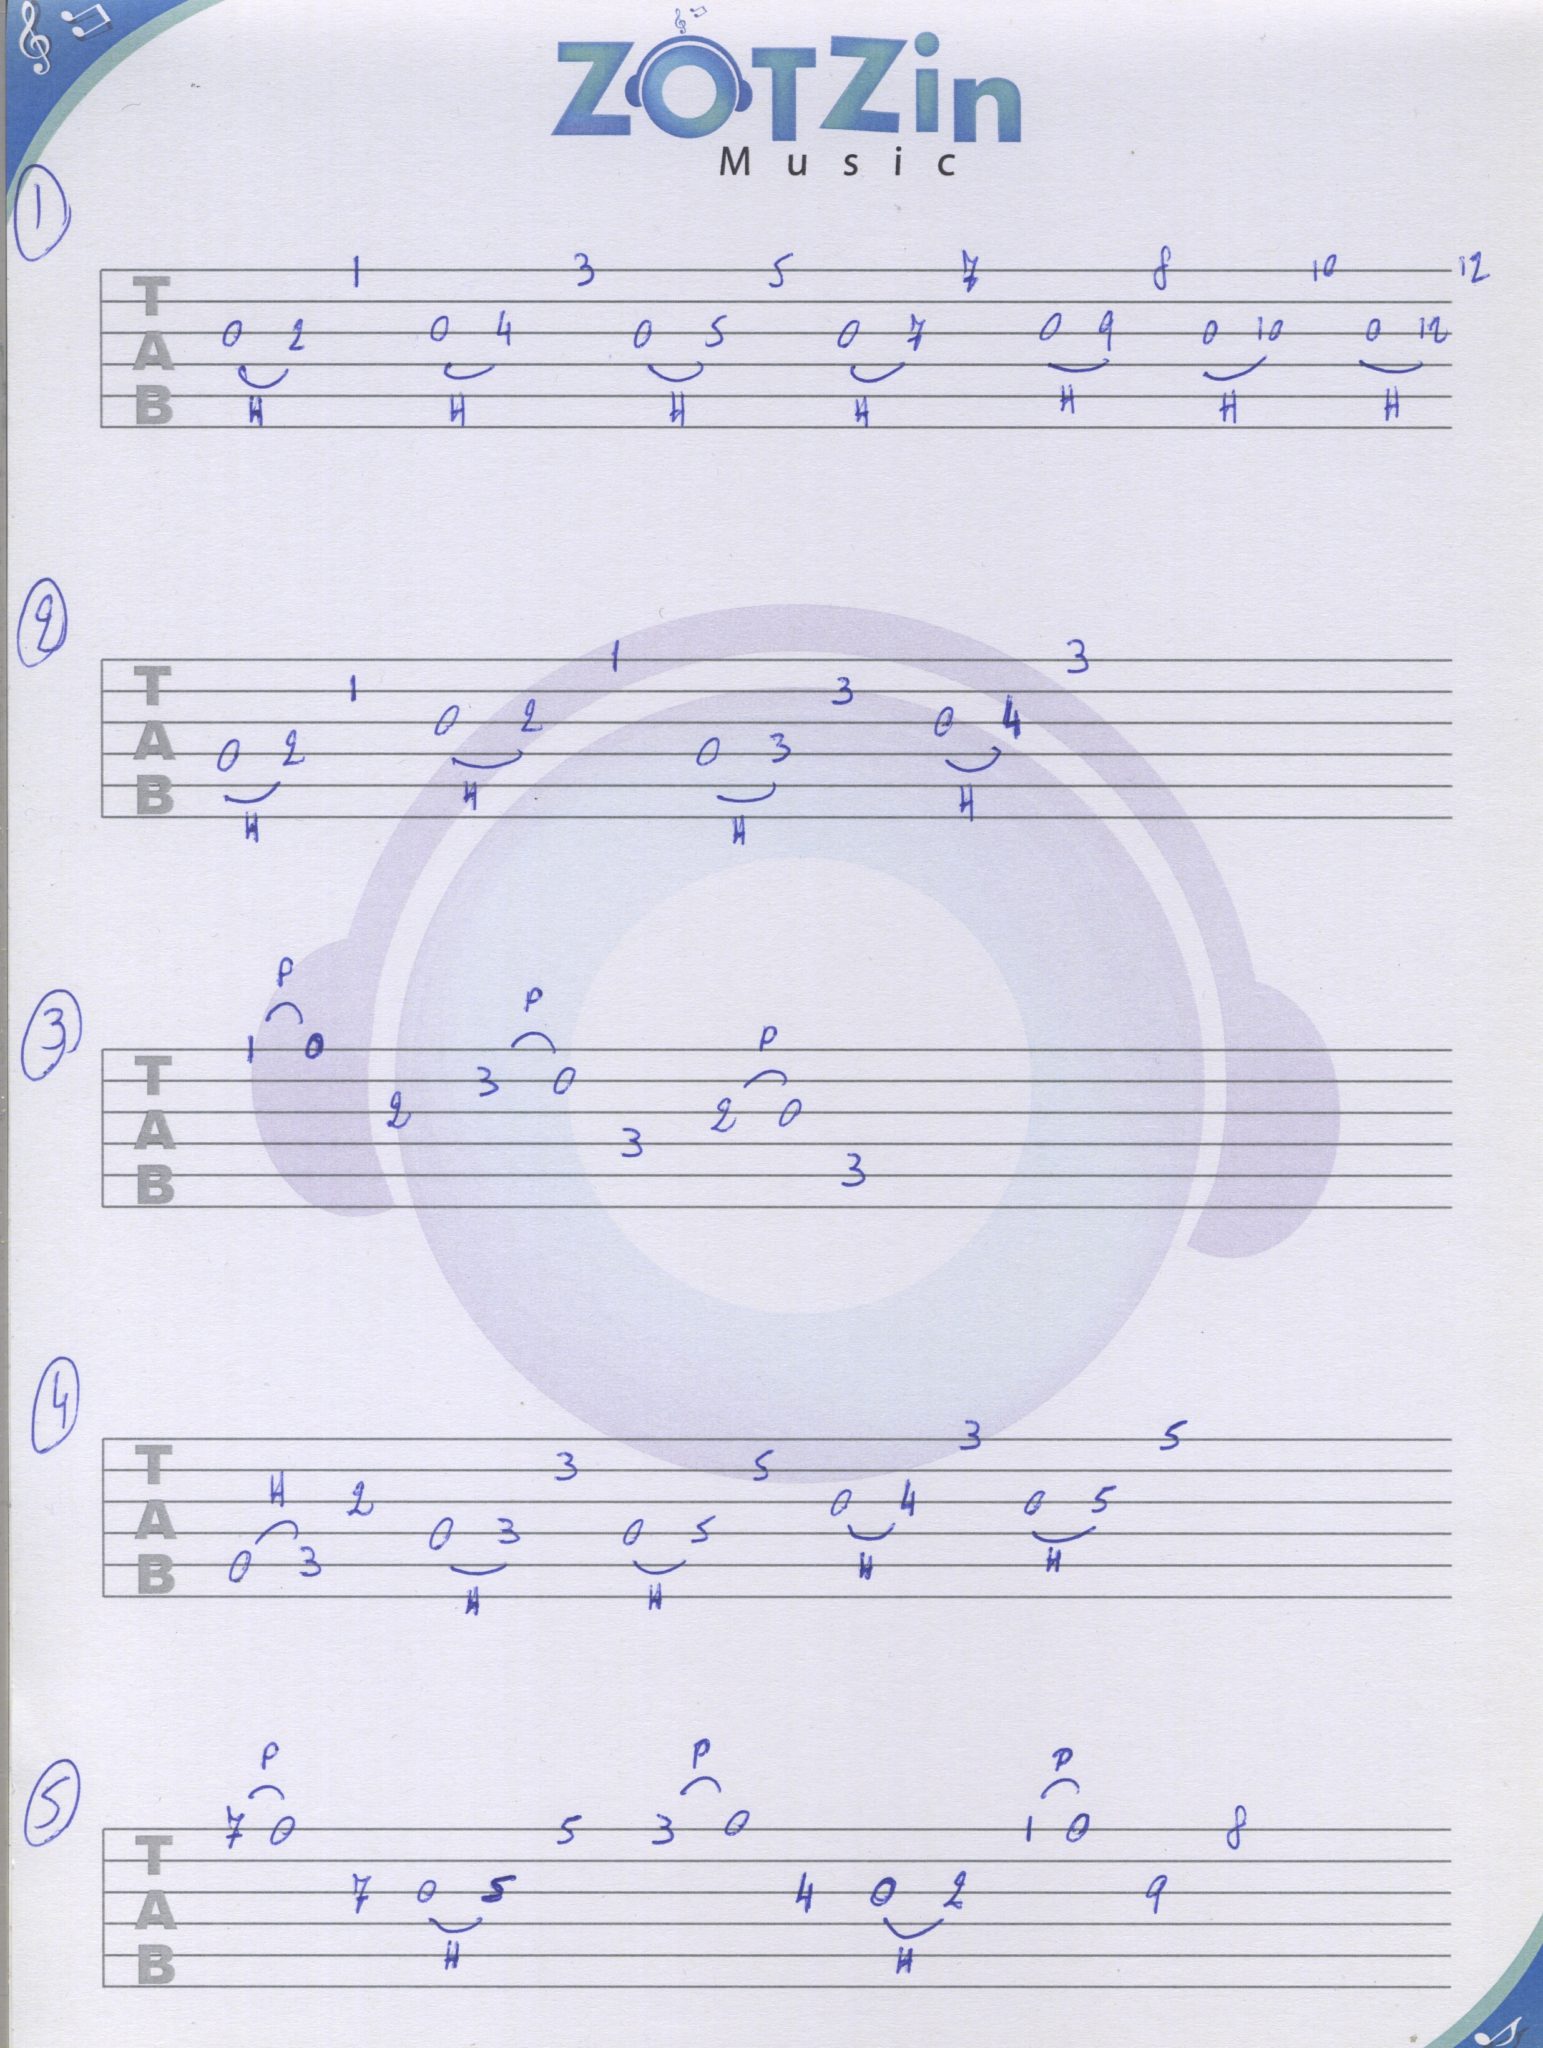 These melodic ideas with 6th intervals will give you ideas for your solos